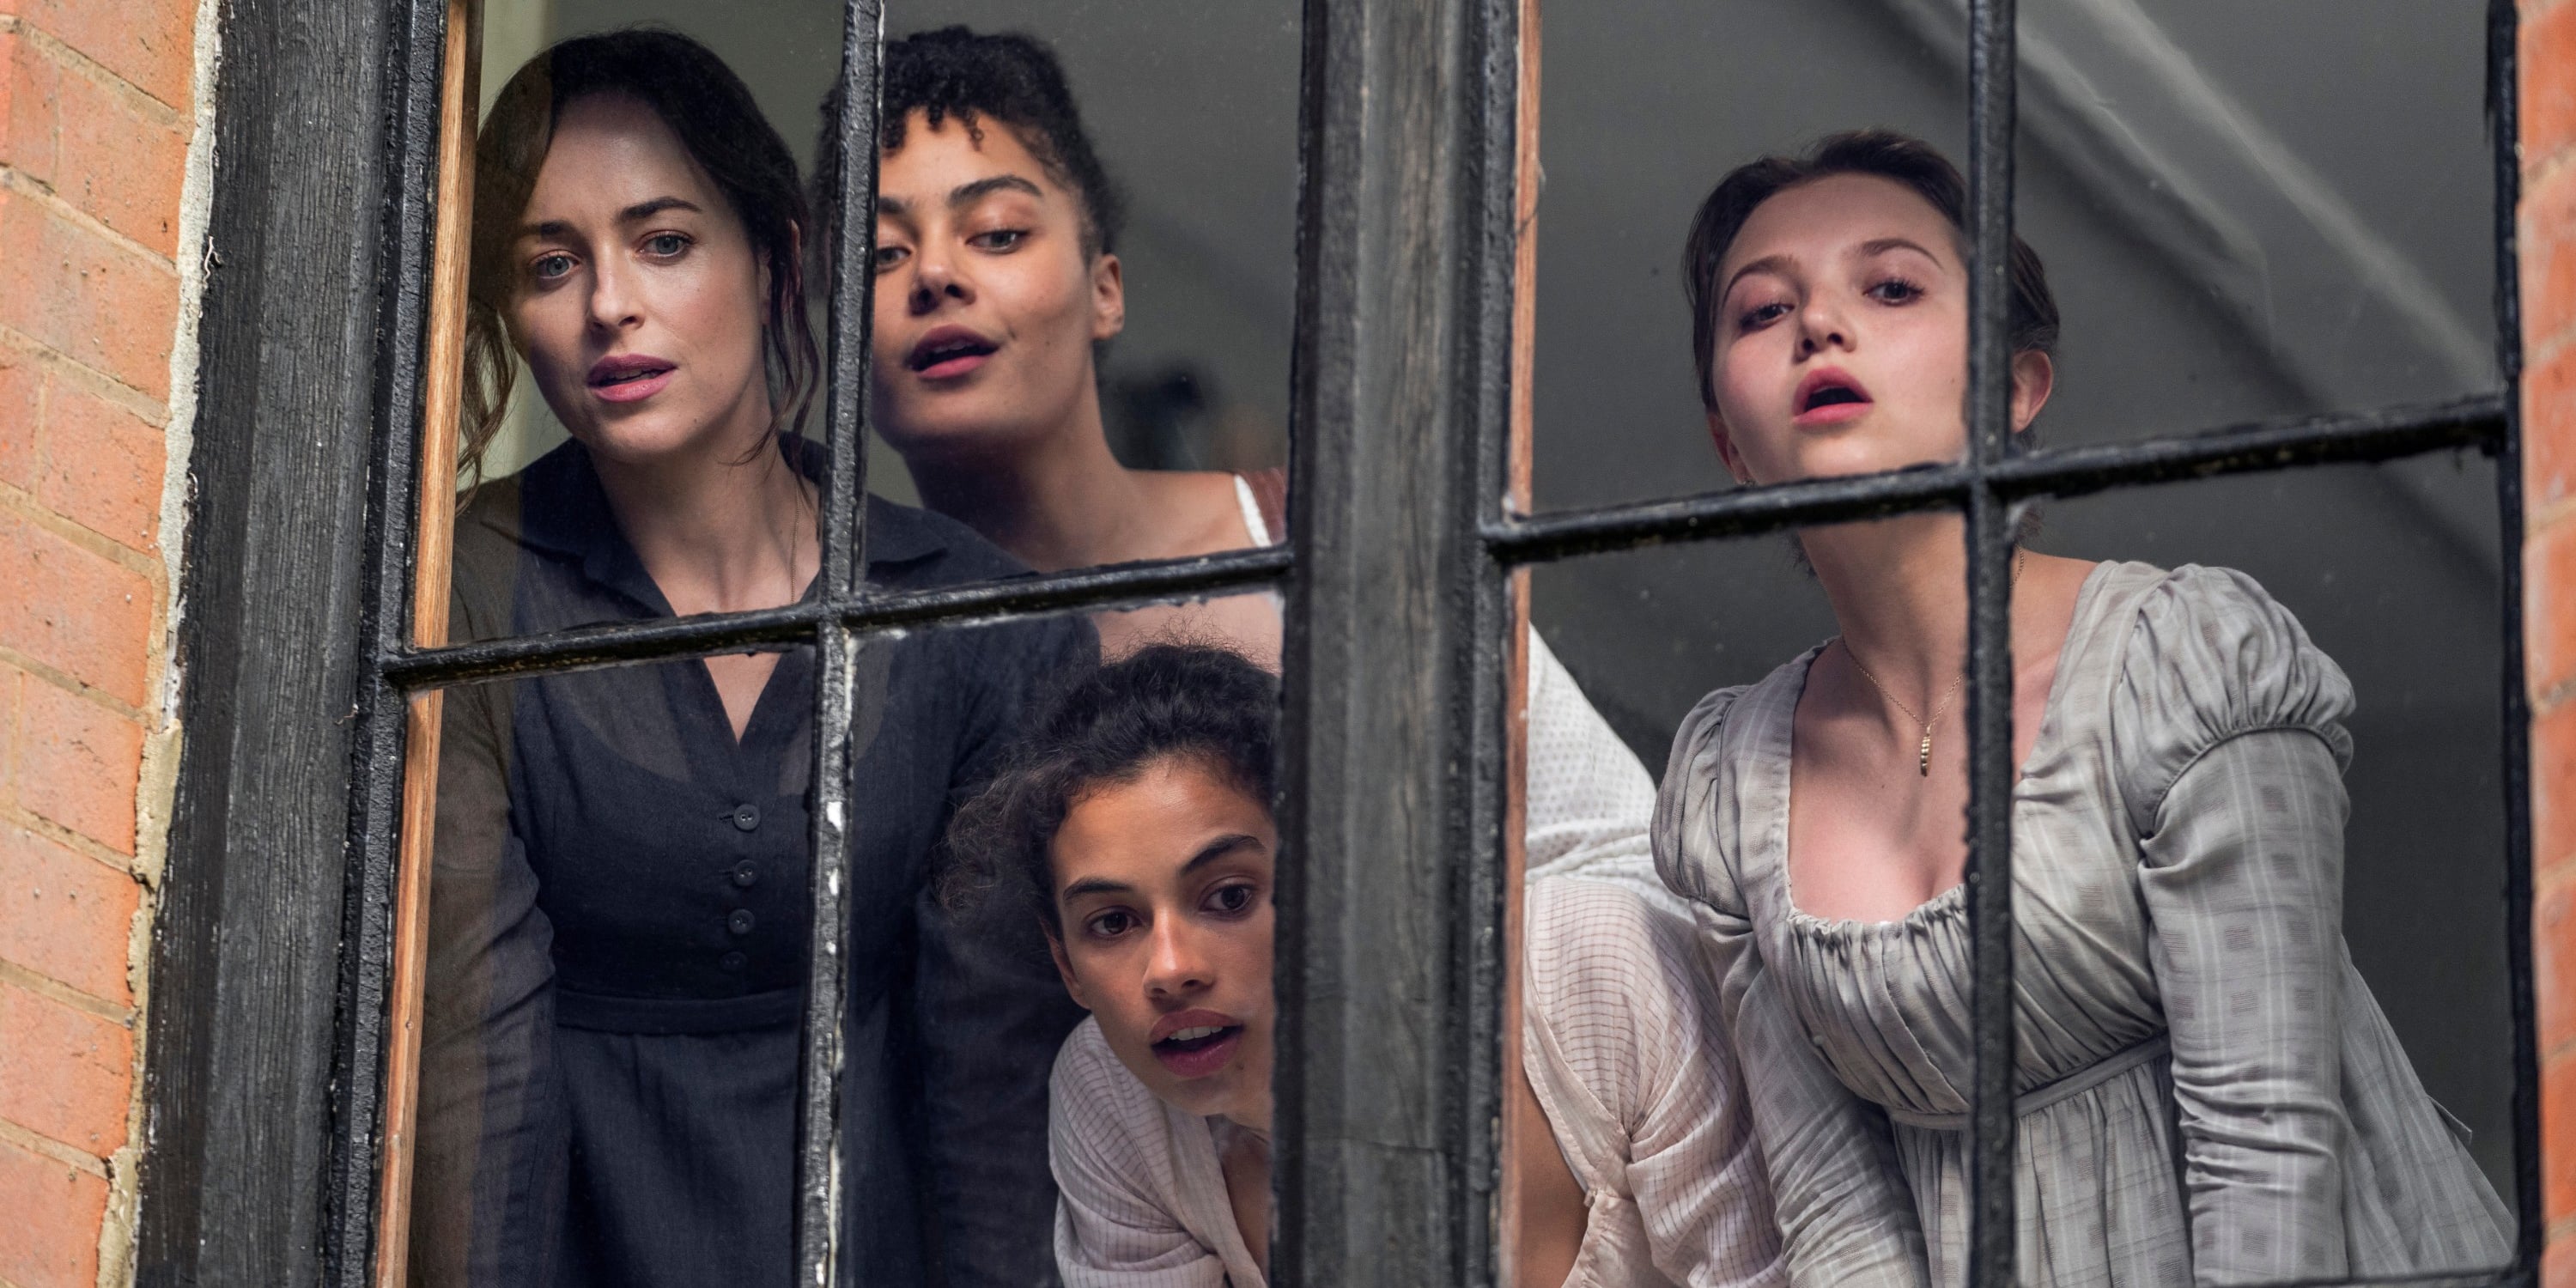 Emma review: A perfect blend of Jane Austen's satire and romance - Vox